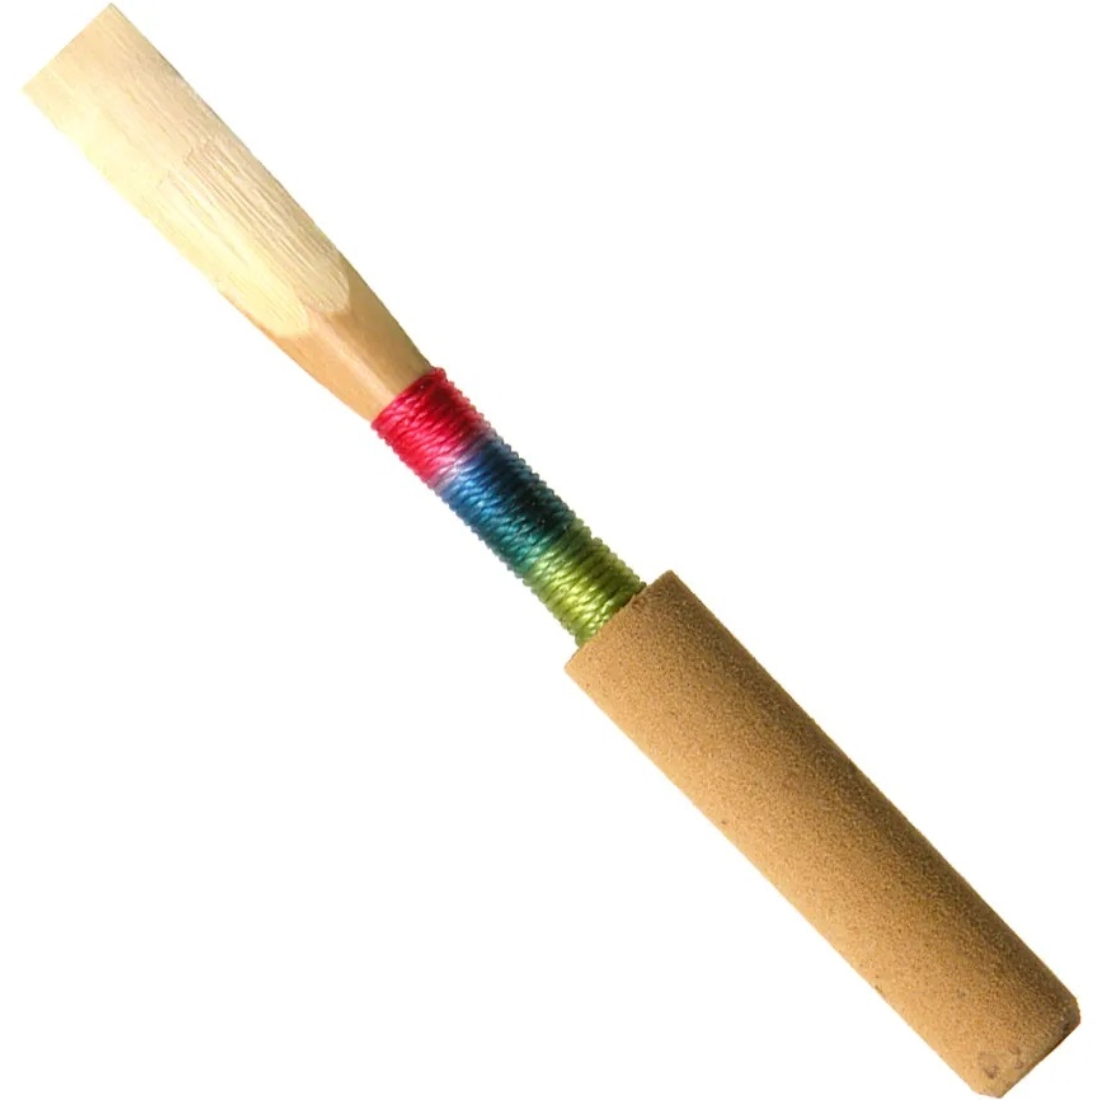 Charles oboe cane weed wound with red, blue, and green string - strength of medium